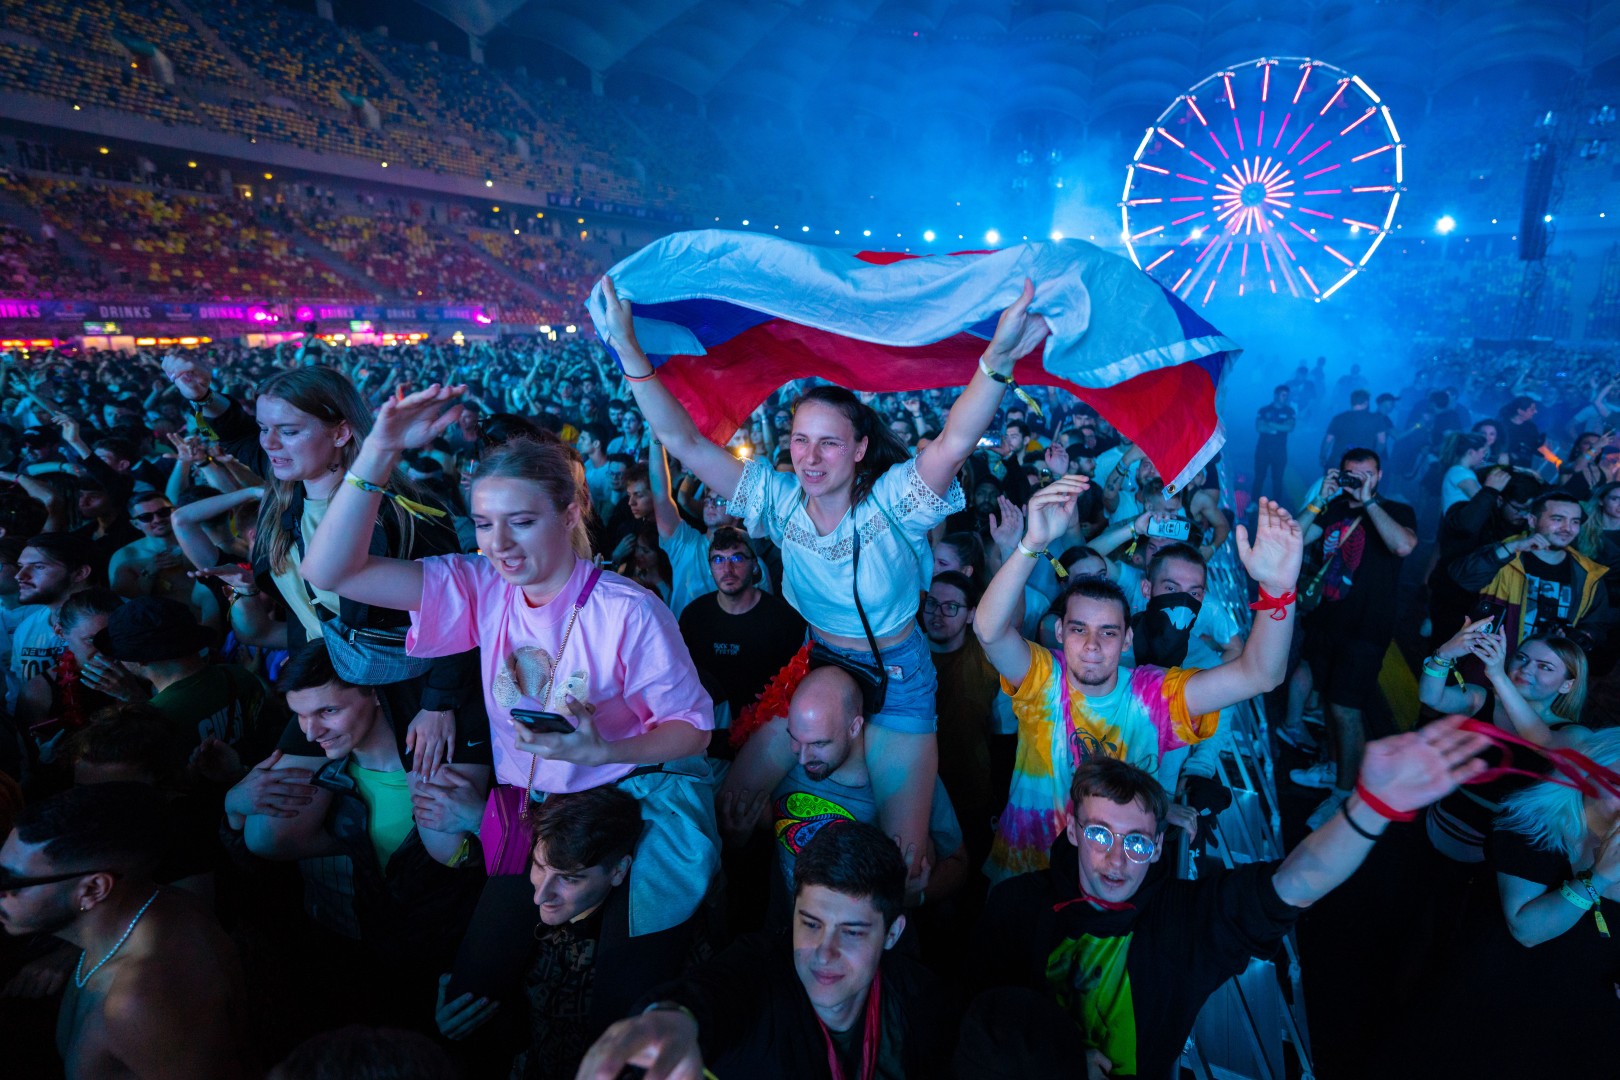 Public at National Arena in Bucharest on June 6, 2022 (d9f2475f5a)